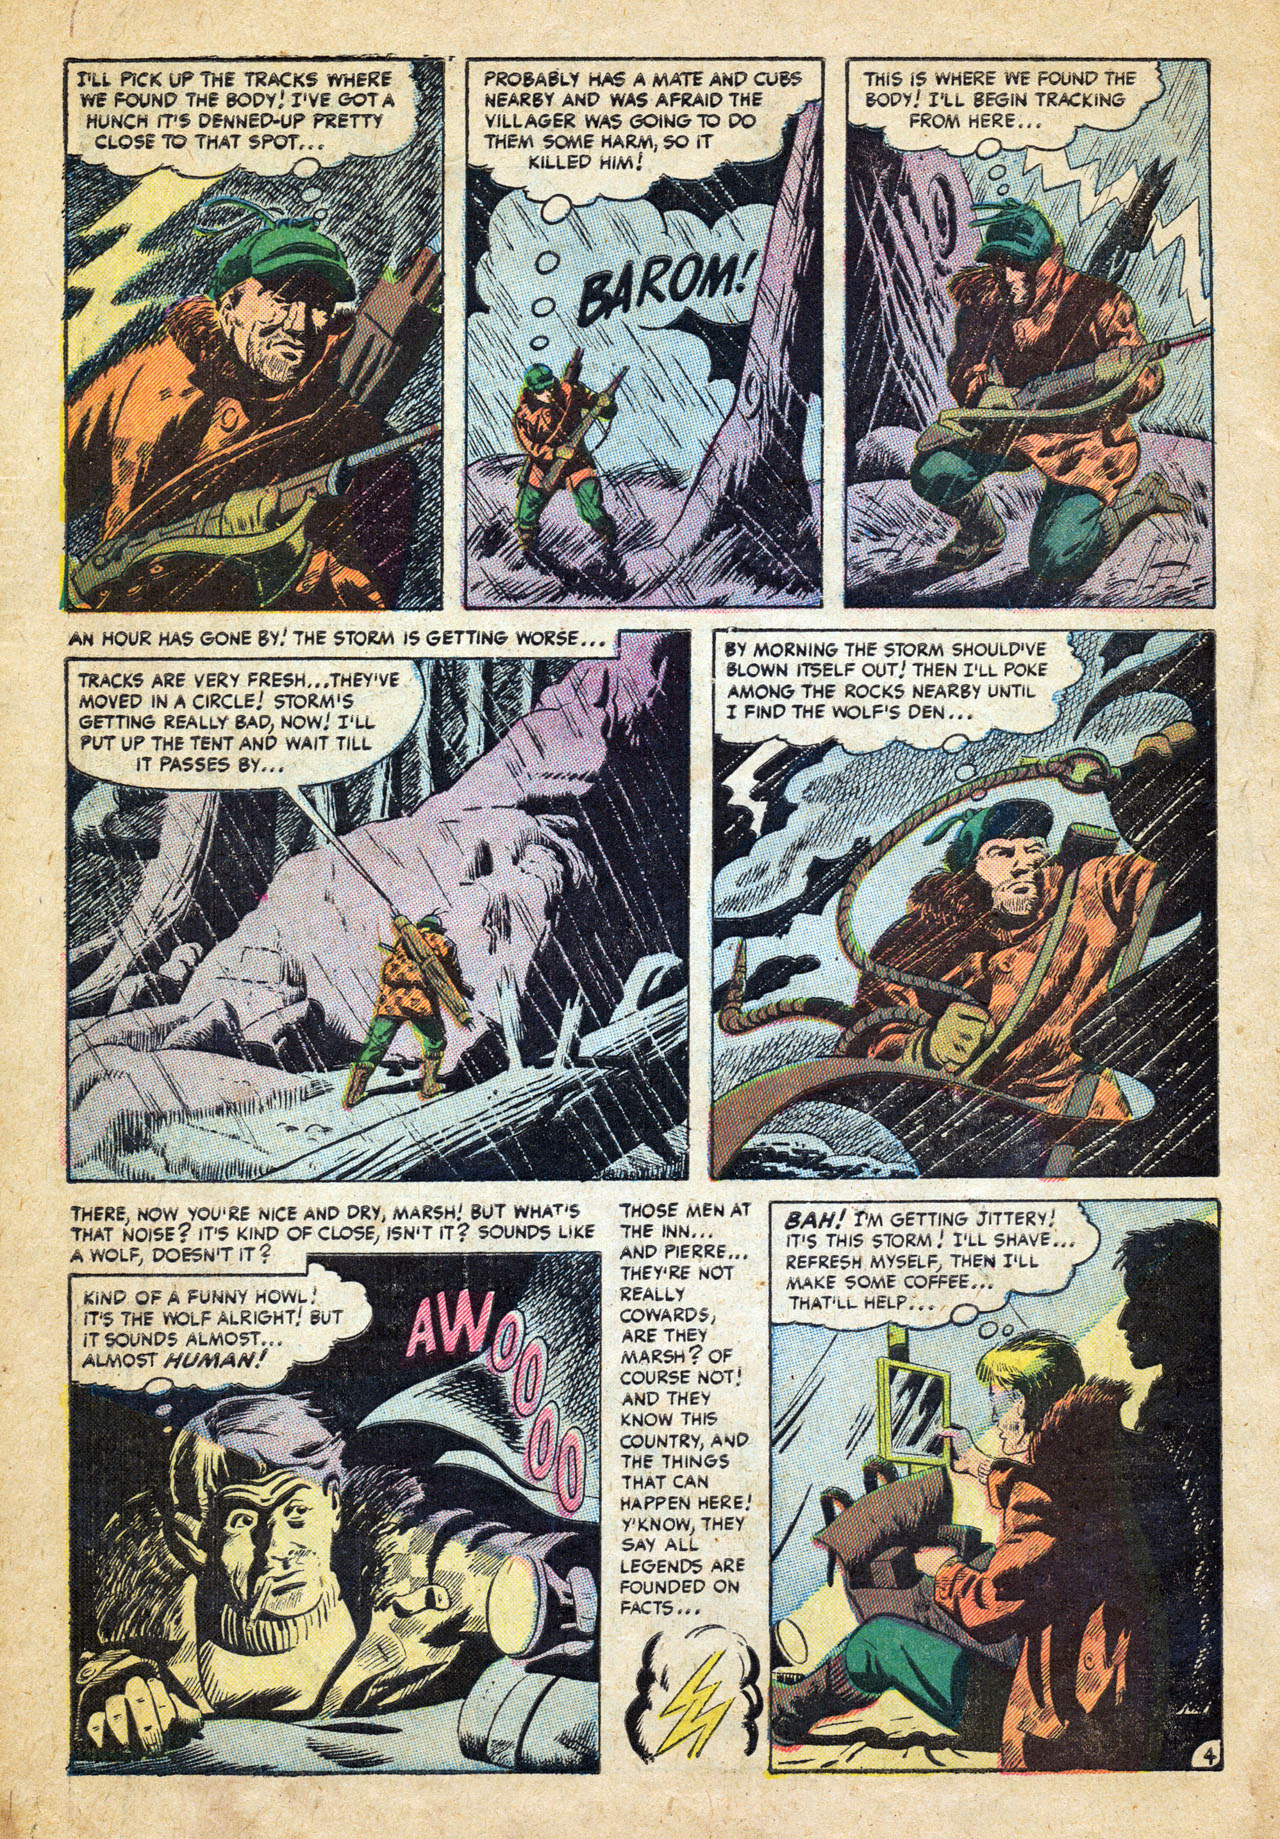 Marvel Tales (1949) 117 Page 5